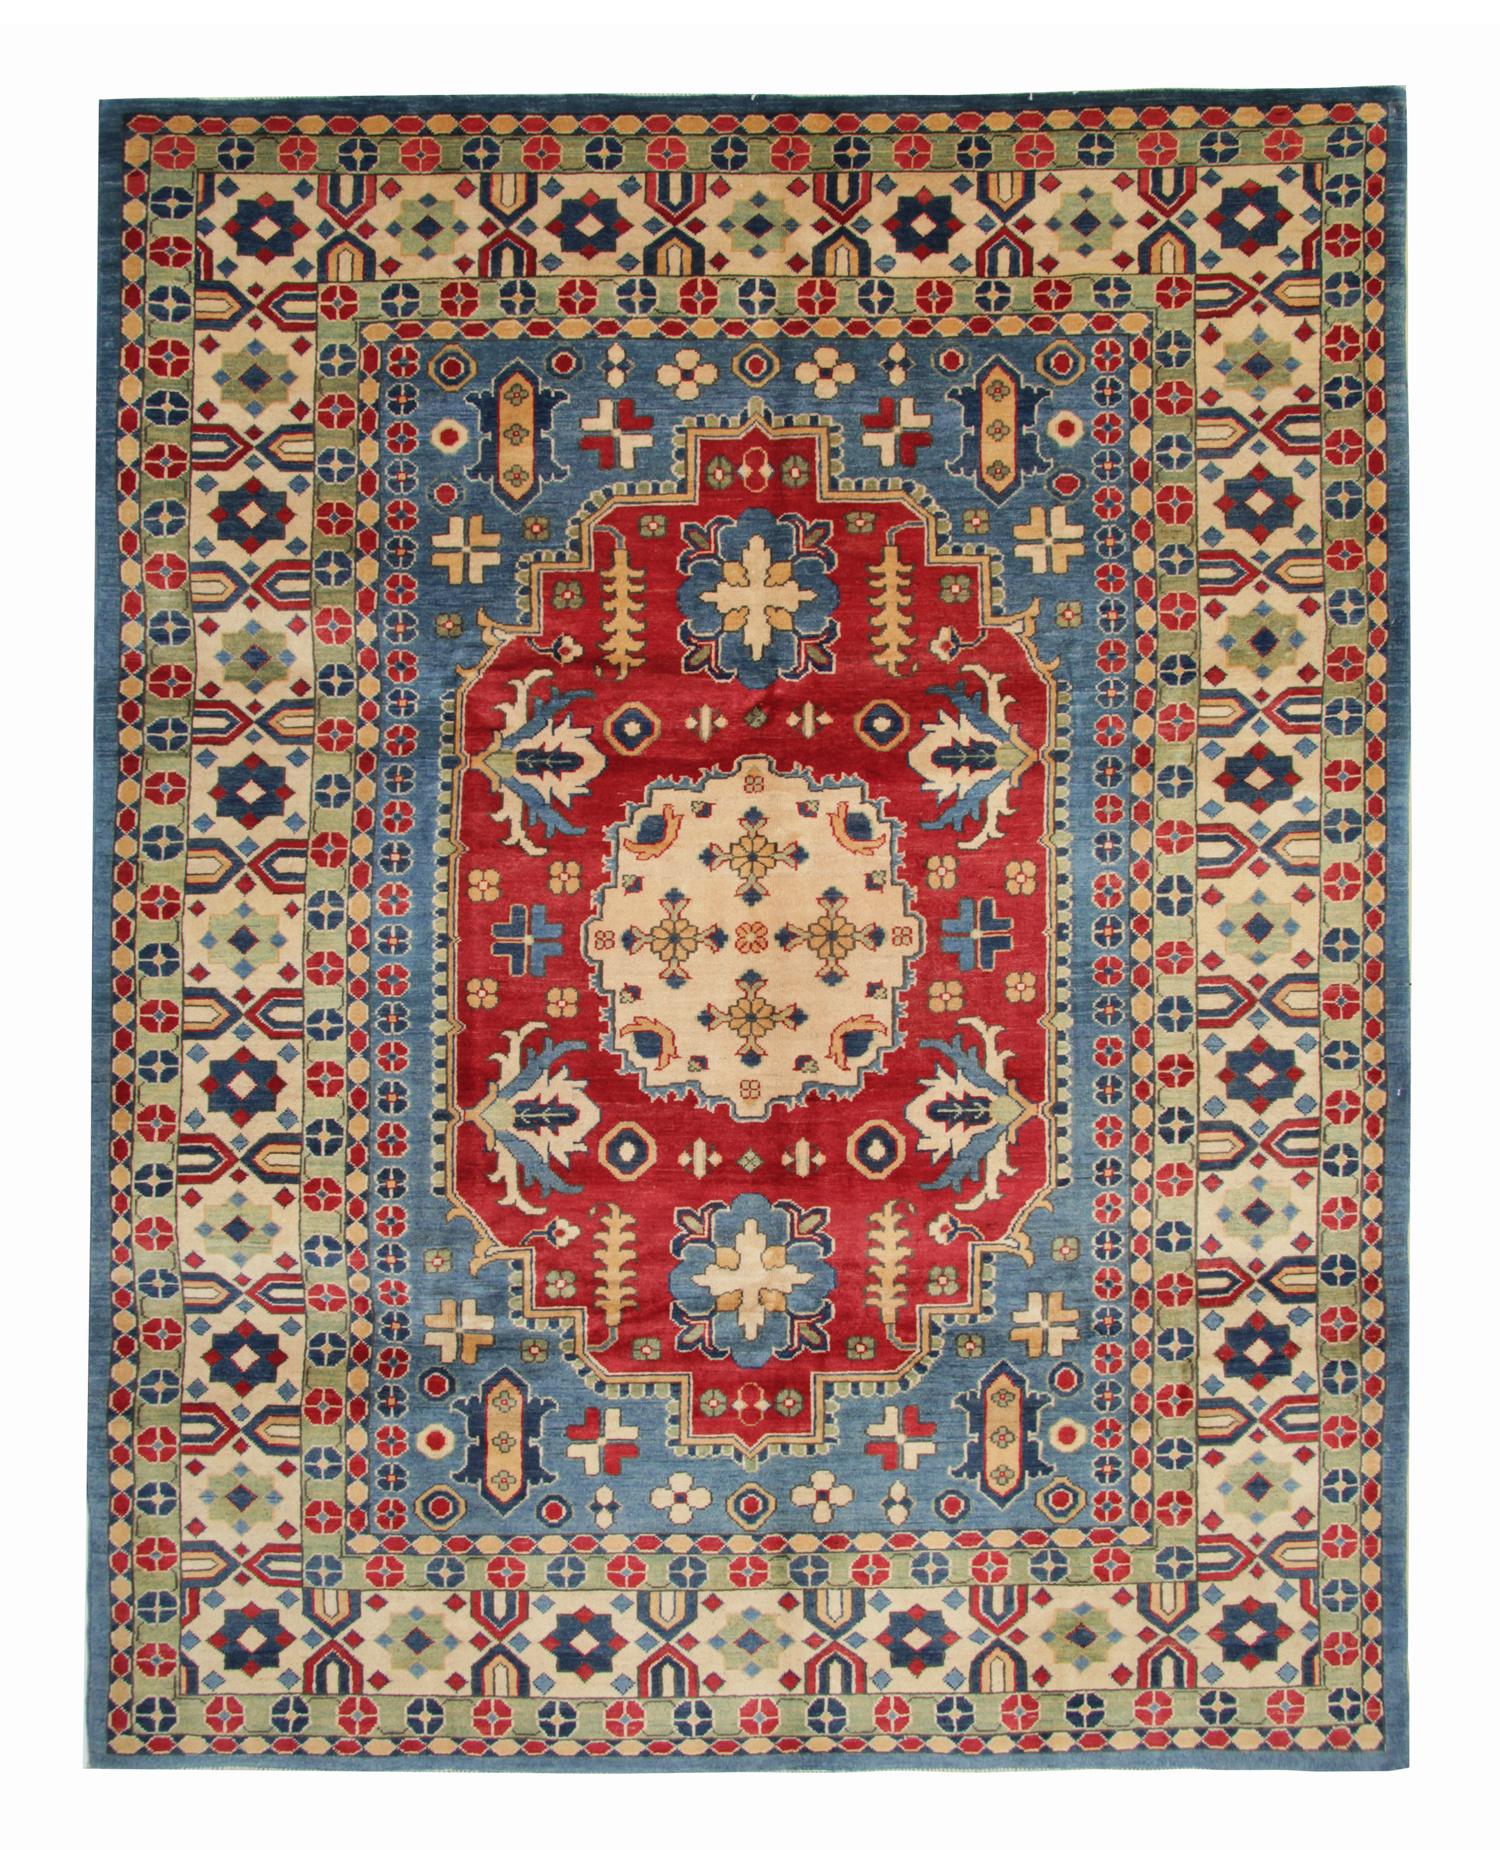 Handmade Carpet, Blue Geometric Rugs, Large Livingroom Rugs In Excellent Condition For Sale In Hampshire, GB